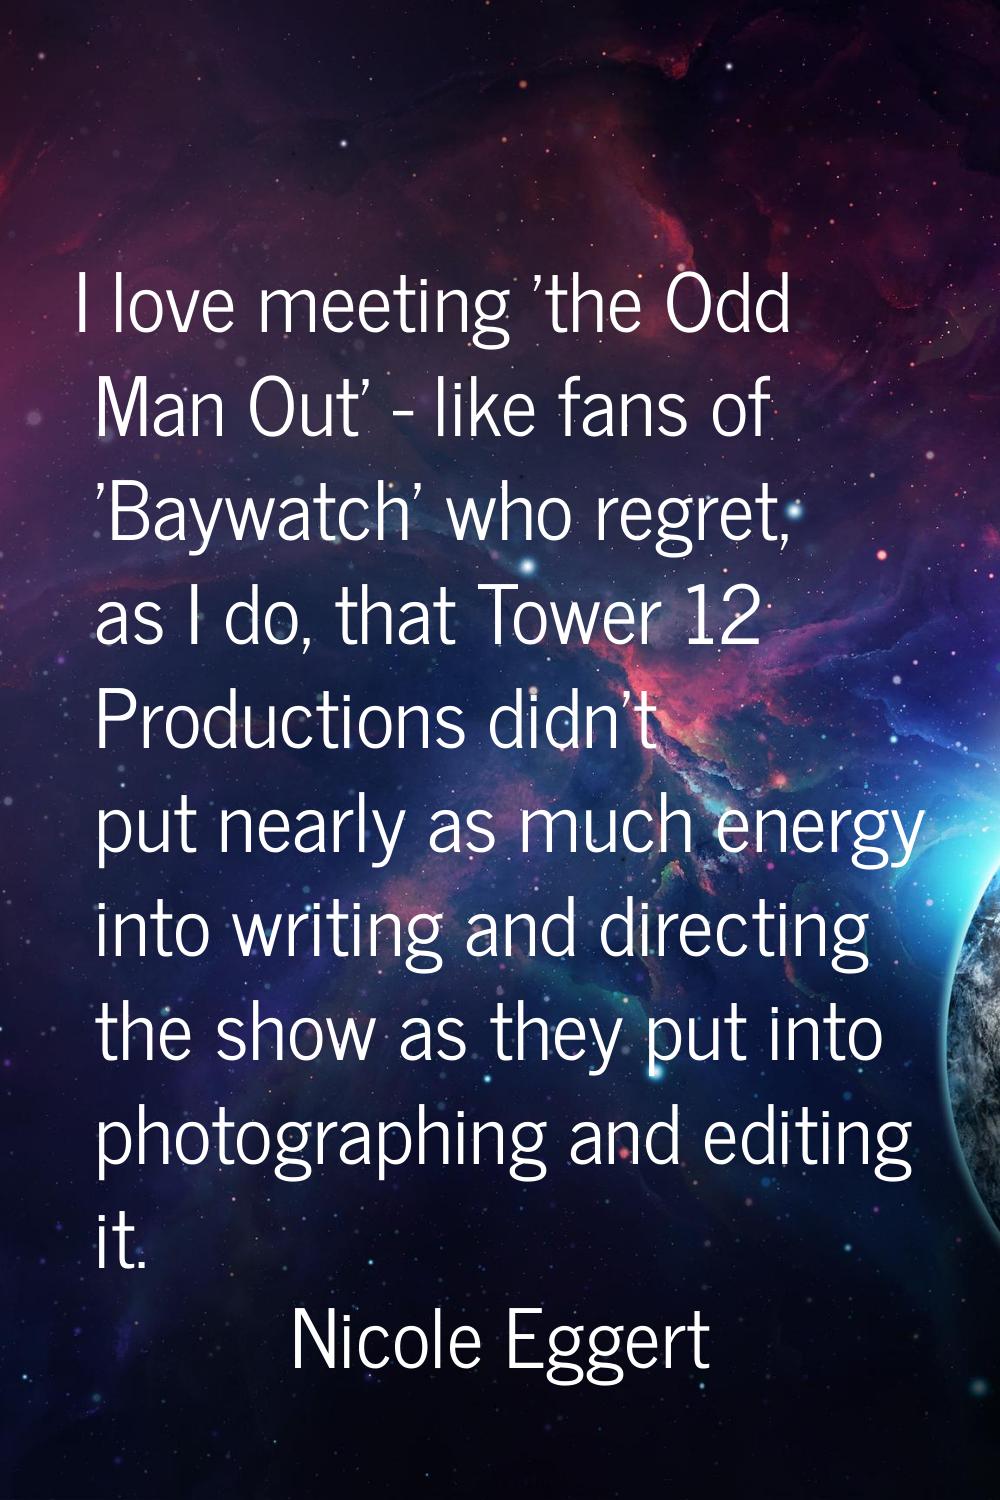 I love meeting 'the Odd Man Out' - like fans of 'Baywatch' who regret, as I do, that Tower 12 Produ